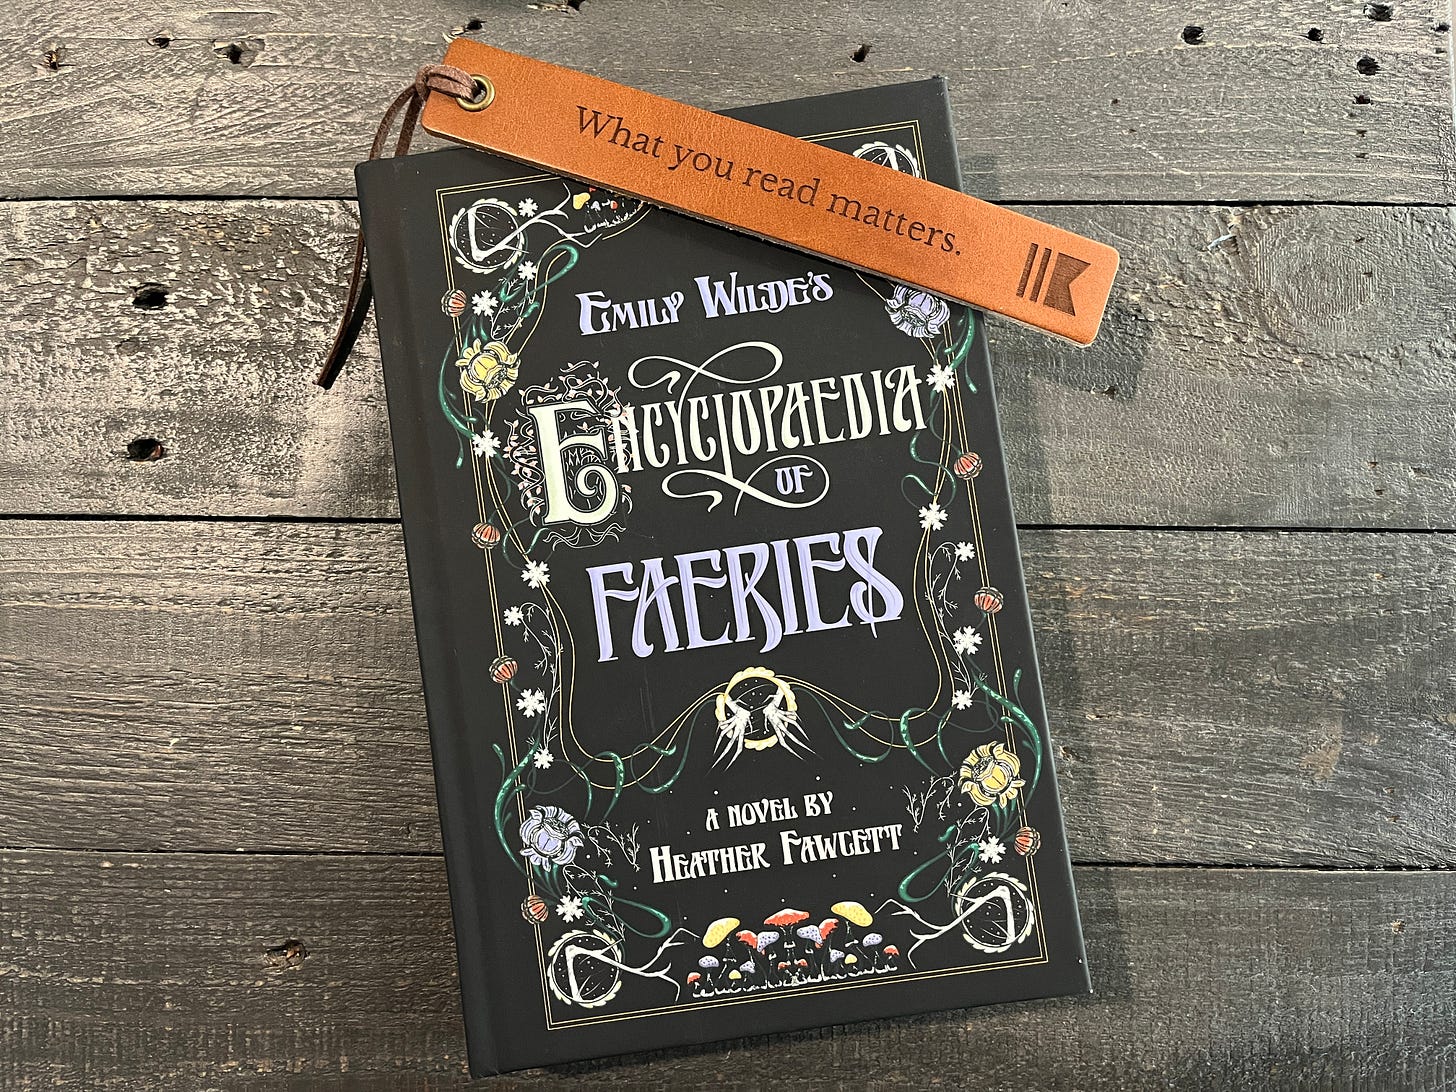 Emily Wilde's Encyclopedia of Fairies by Heather Fawcett, with leather bookmark that says "What you read matters"